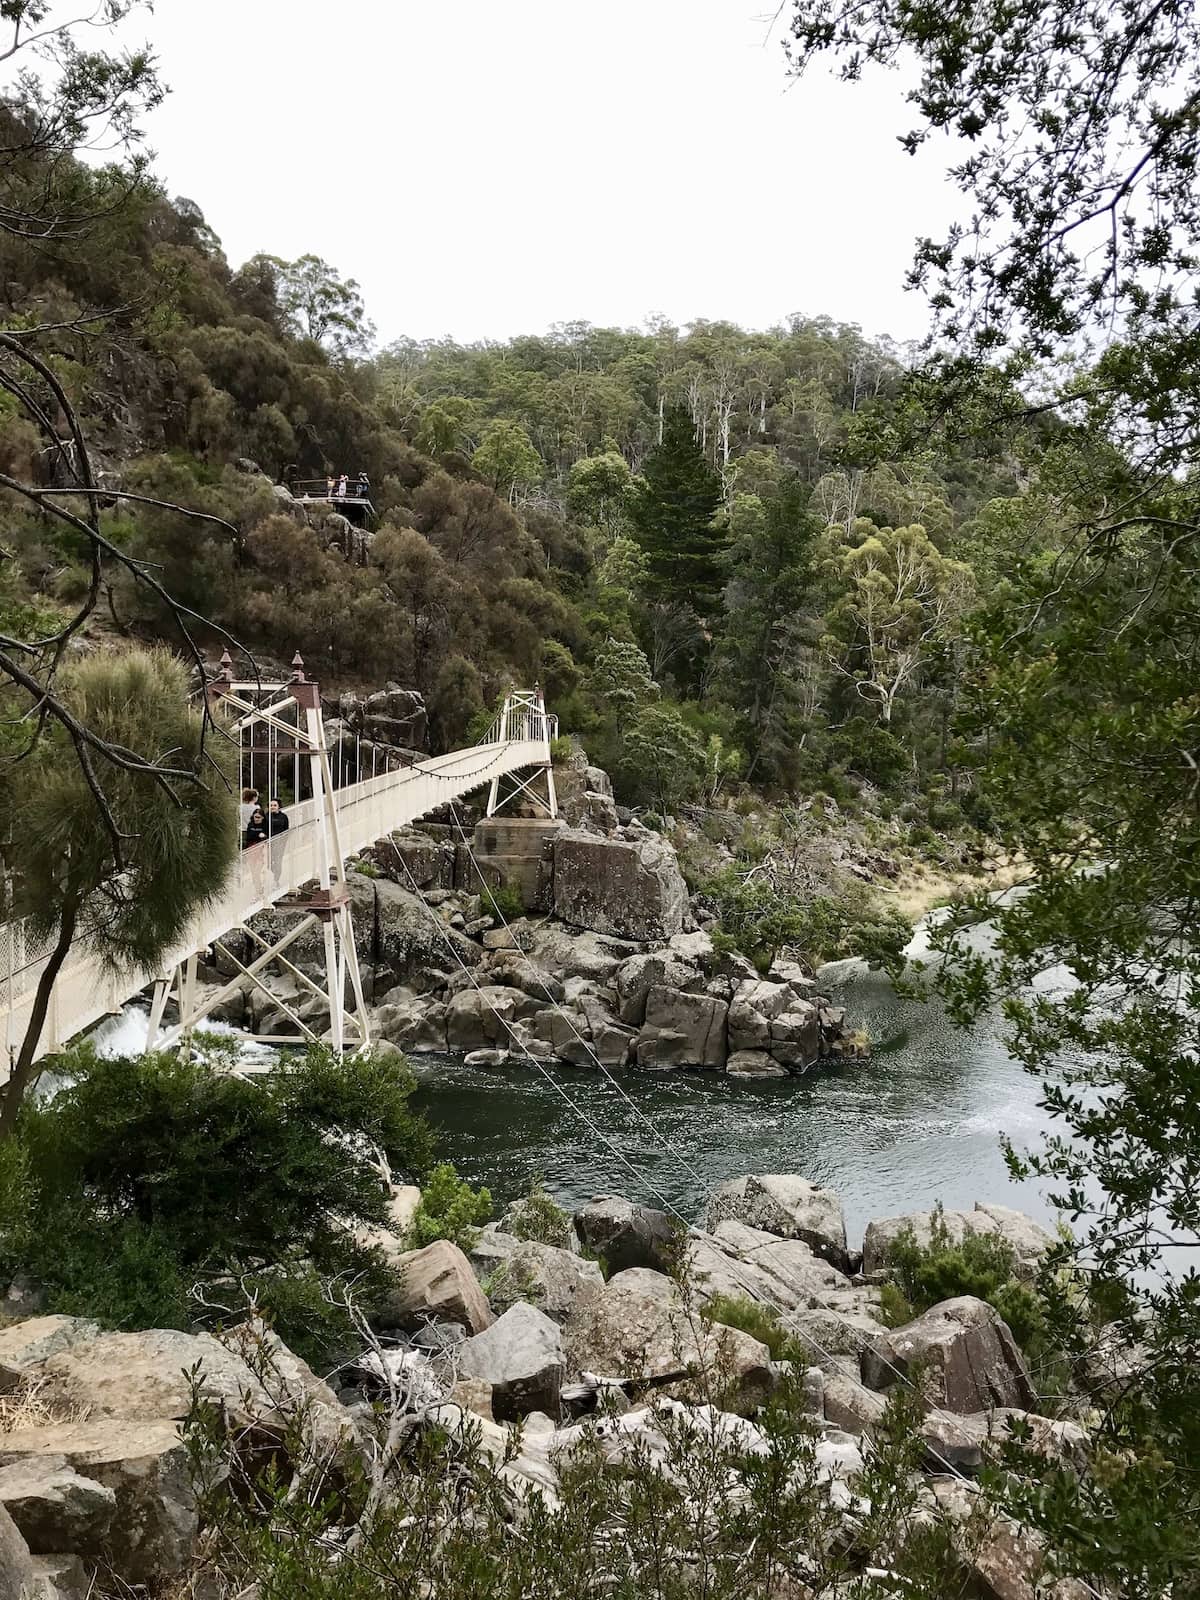 A suspension bridge as seen from one side, with a river running beneath